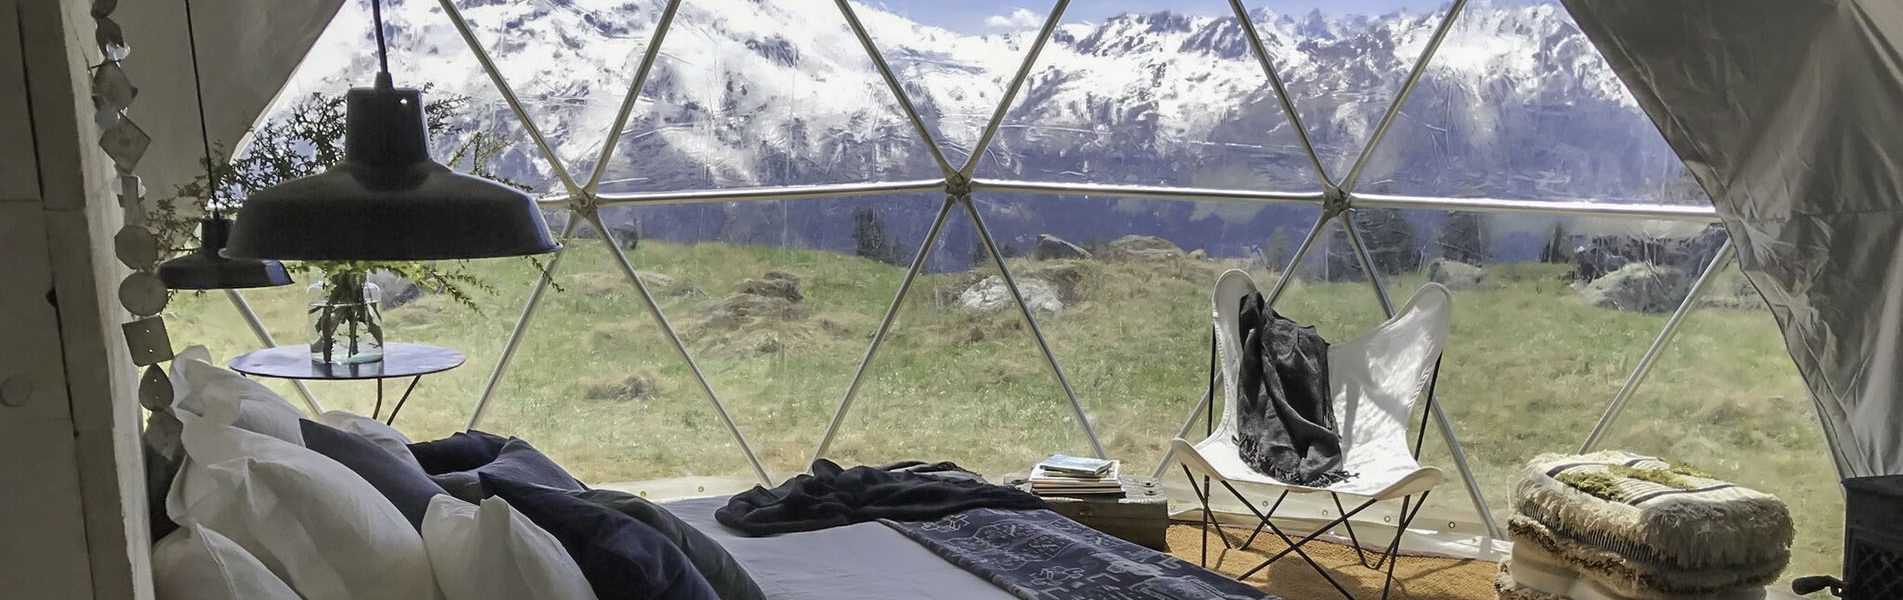 10 Reasons Domes - Best Glamping Tents - Pacific Domes